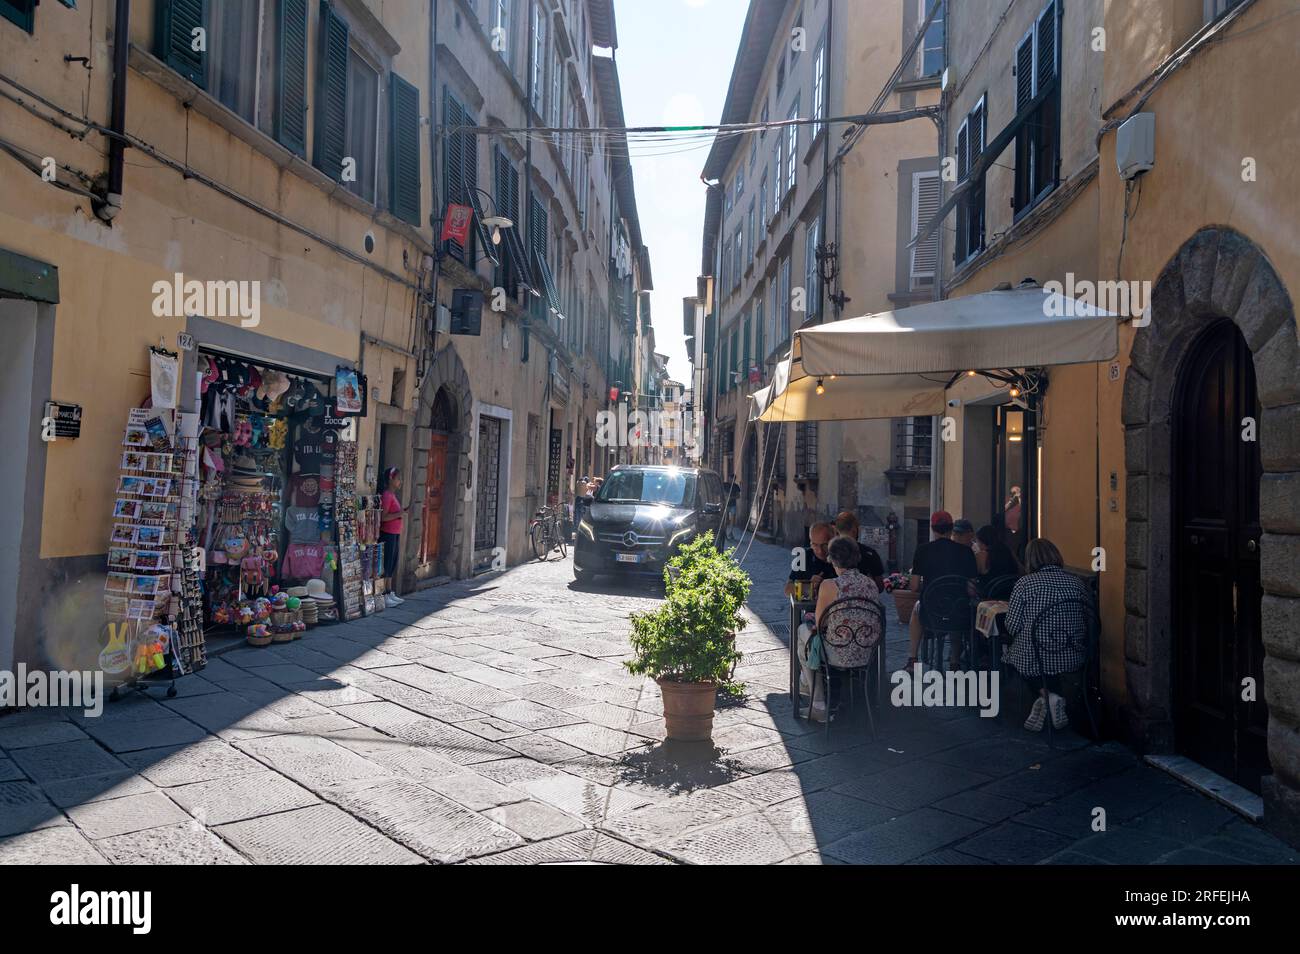 A car passing along a medieval narrow cobblestone street usually filled with tourists in the city of Lucca in the Tuscany region of Italy. Stock Photo